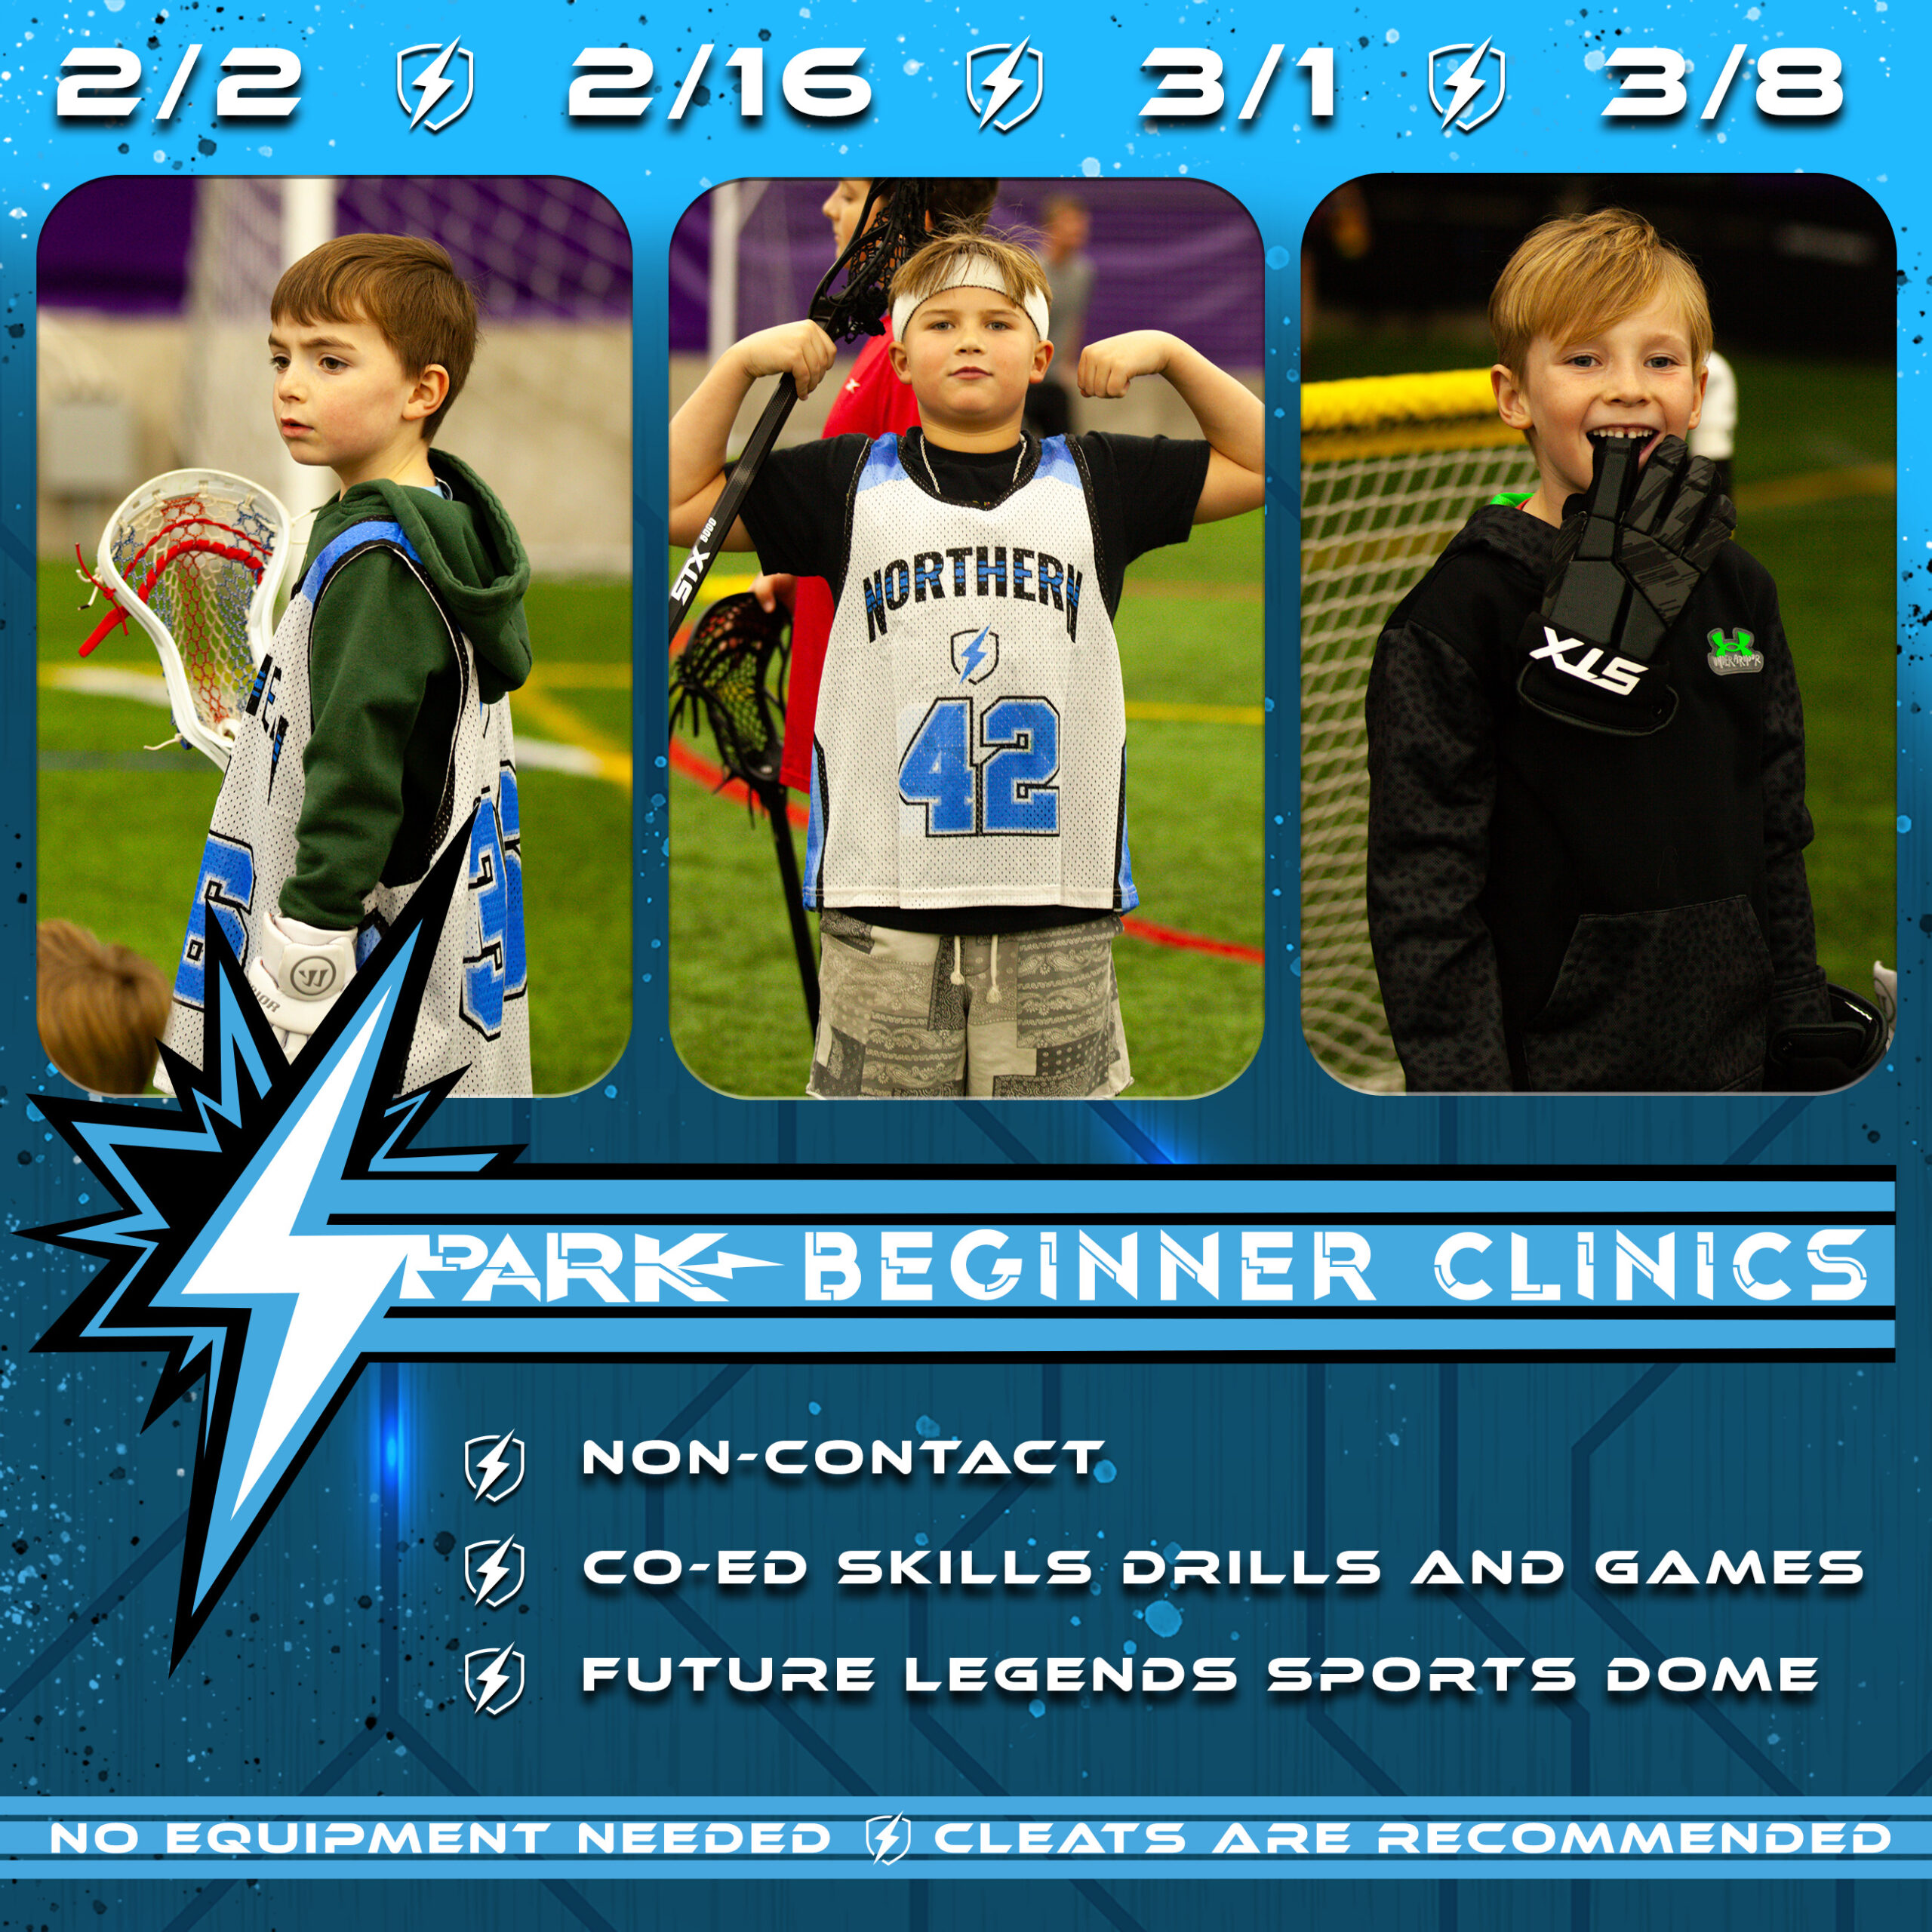 Spark Beginner Clinics: February & March - Northern Power Lacrosse